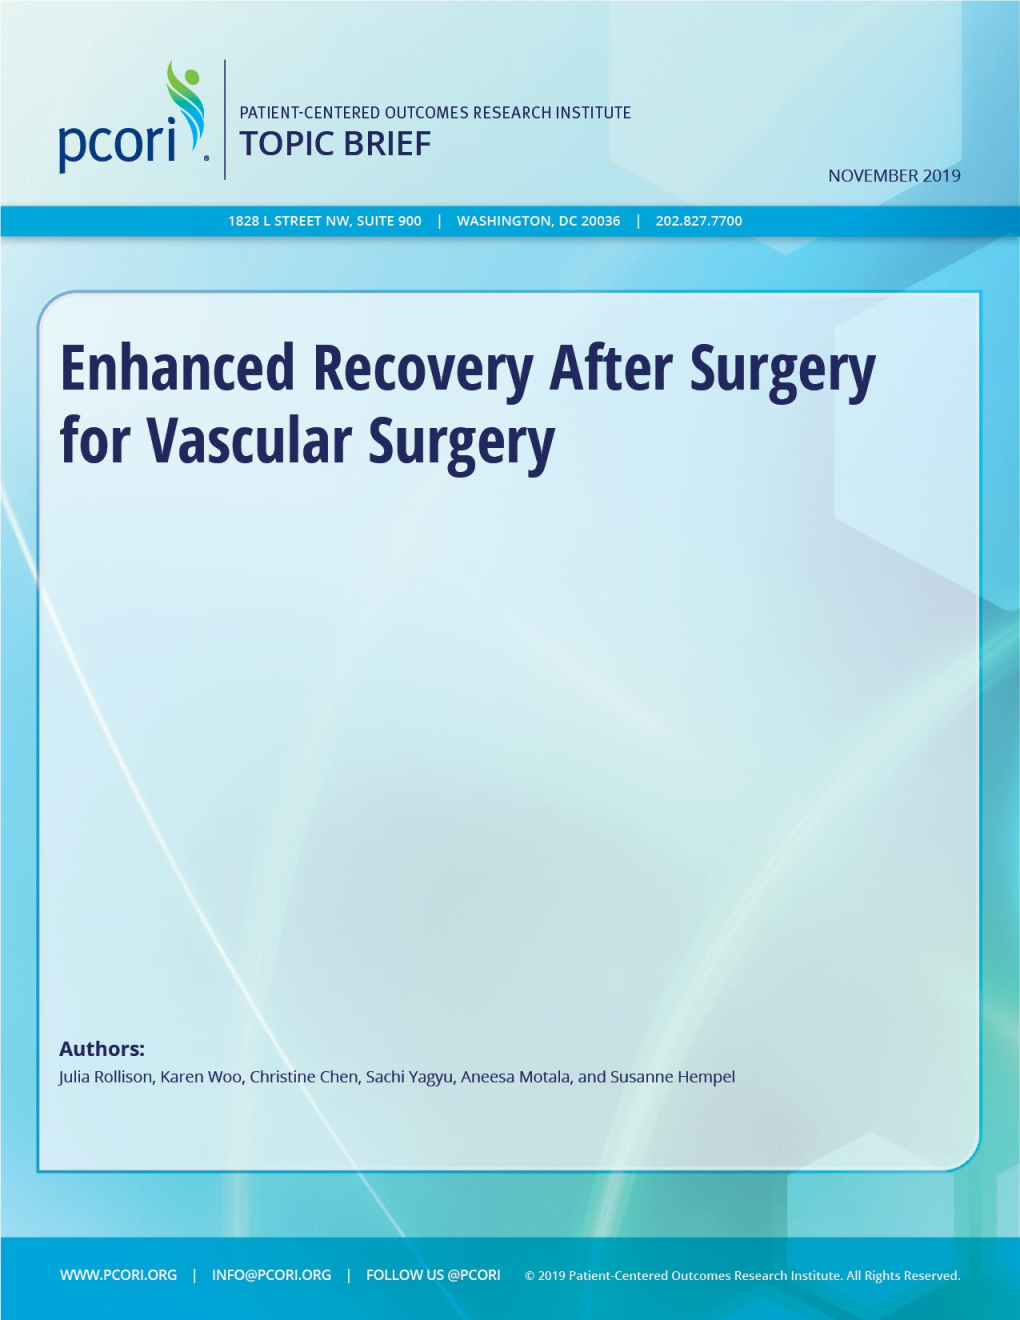 Enhanced Recovery After Surgery for Vascular Surgery